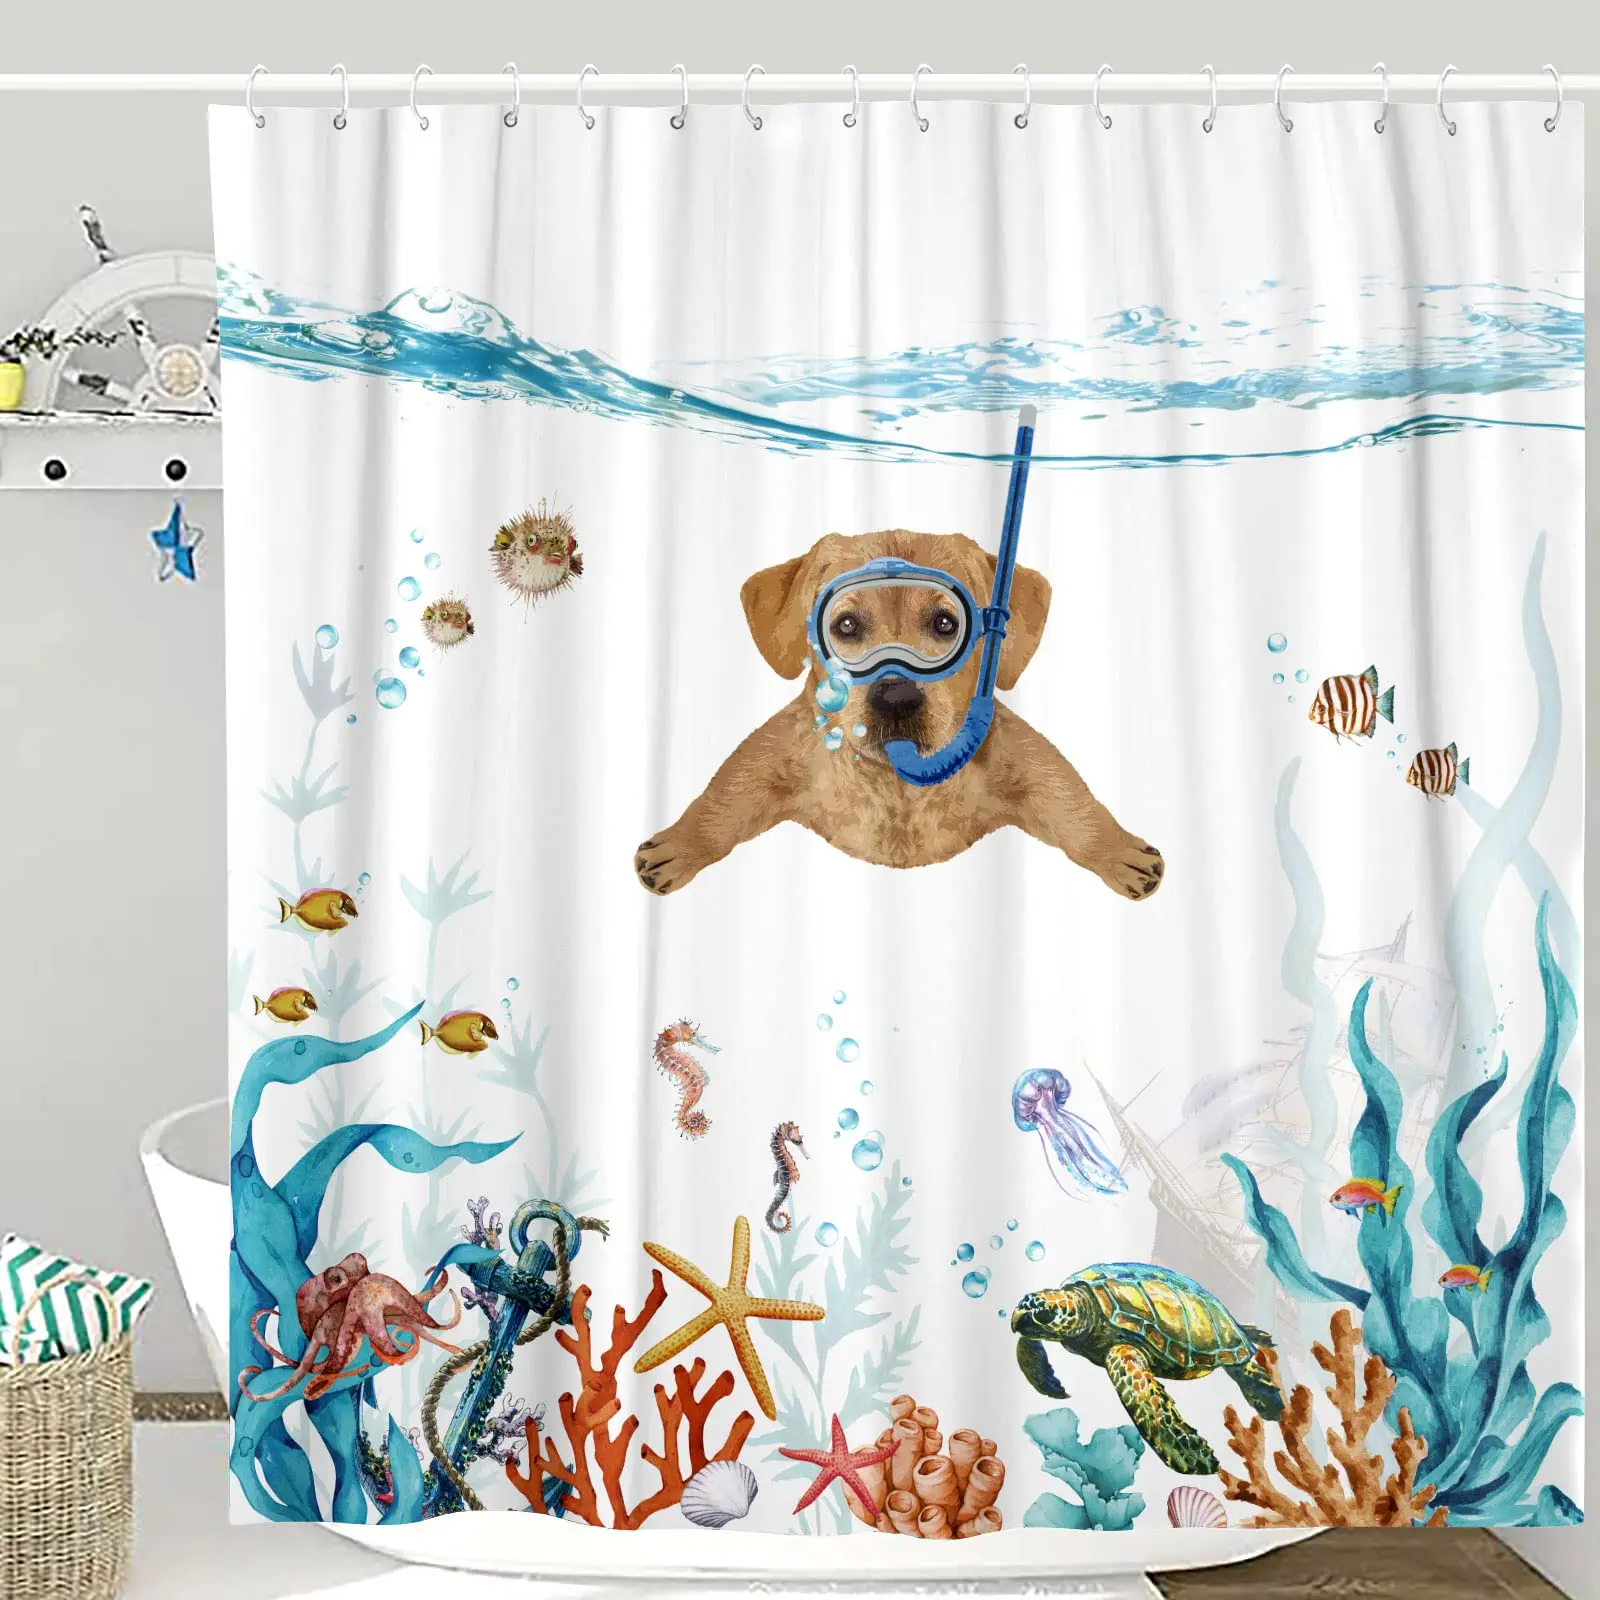 

Funny Dog Shower Curtain Blue Ocean Shower Curtains with Animal Octopus Starfish Turtle Anchor Fish Nautical Bathroom Curtains